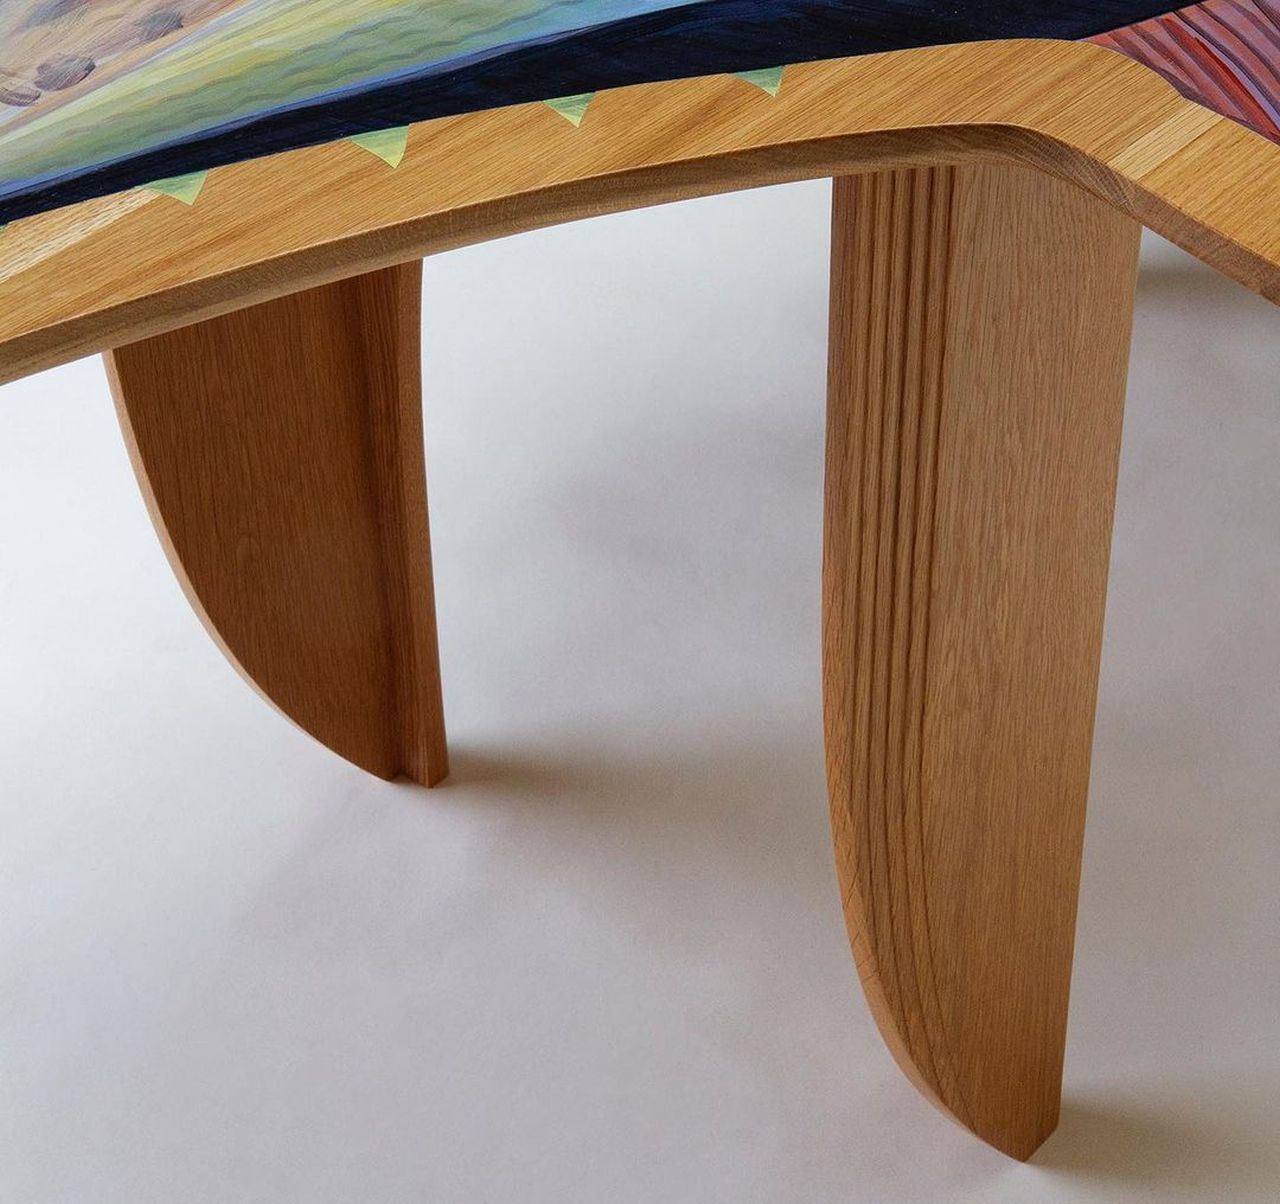 Tuna Fish Table by Japanese Designer-wooden fin standing